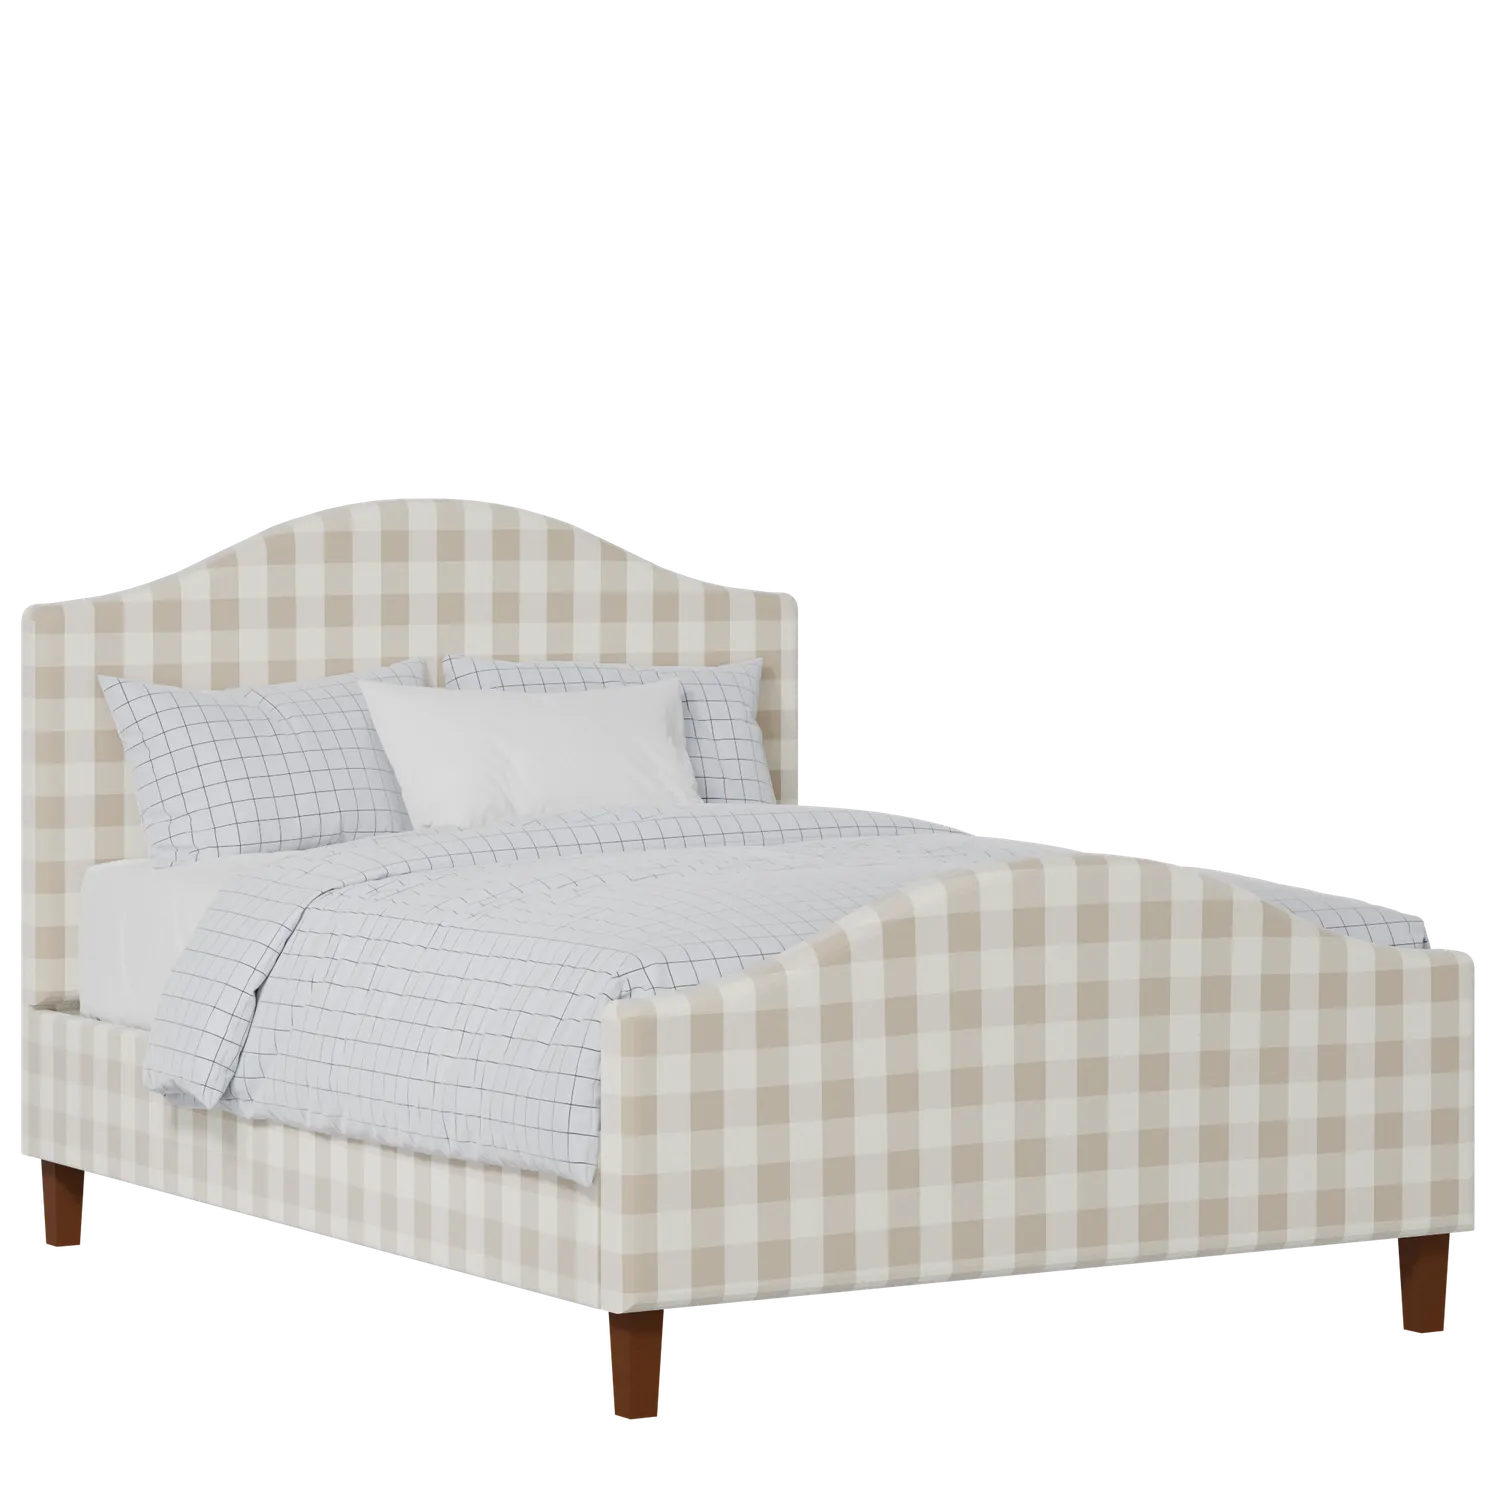 Burley upholstered bed in Romo Kemble Putty fabric with Juno mattress